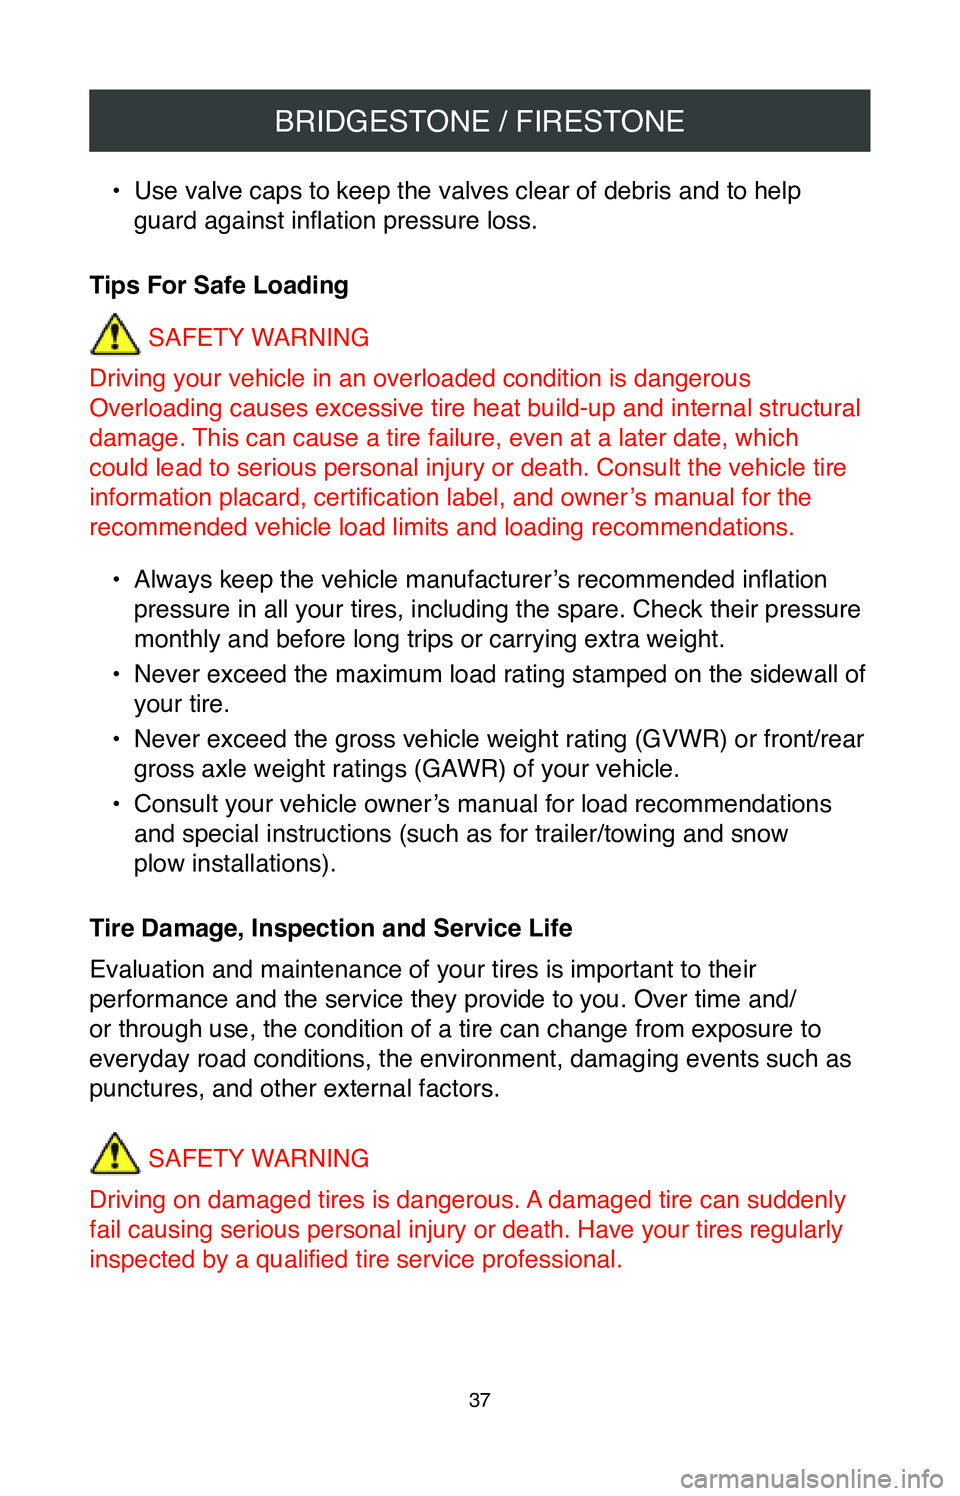 TOYOTA YARIS 2020  Warranties & Maintenance Guides (in English) BRIDGESTONE / FIRESTONE
37
• Use valve caps to keep the valves clear of debris and to help 
guard against inflation pressure loss.
Tips For Safe Loading SAFETY WARNING
Driving your vehicle in an ove